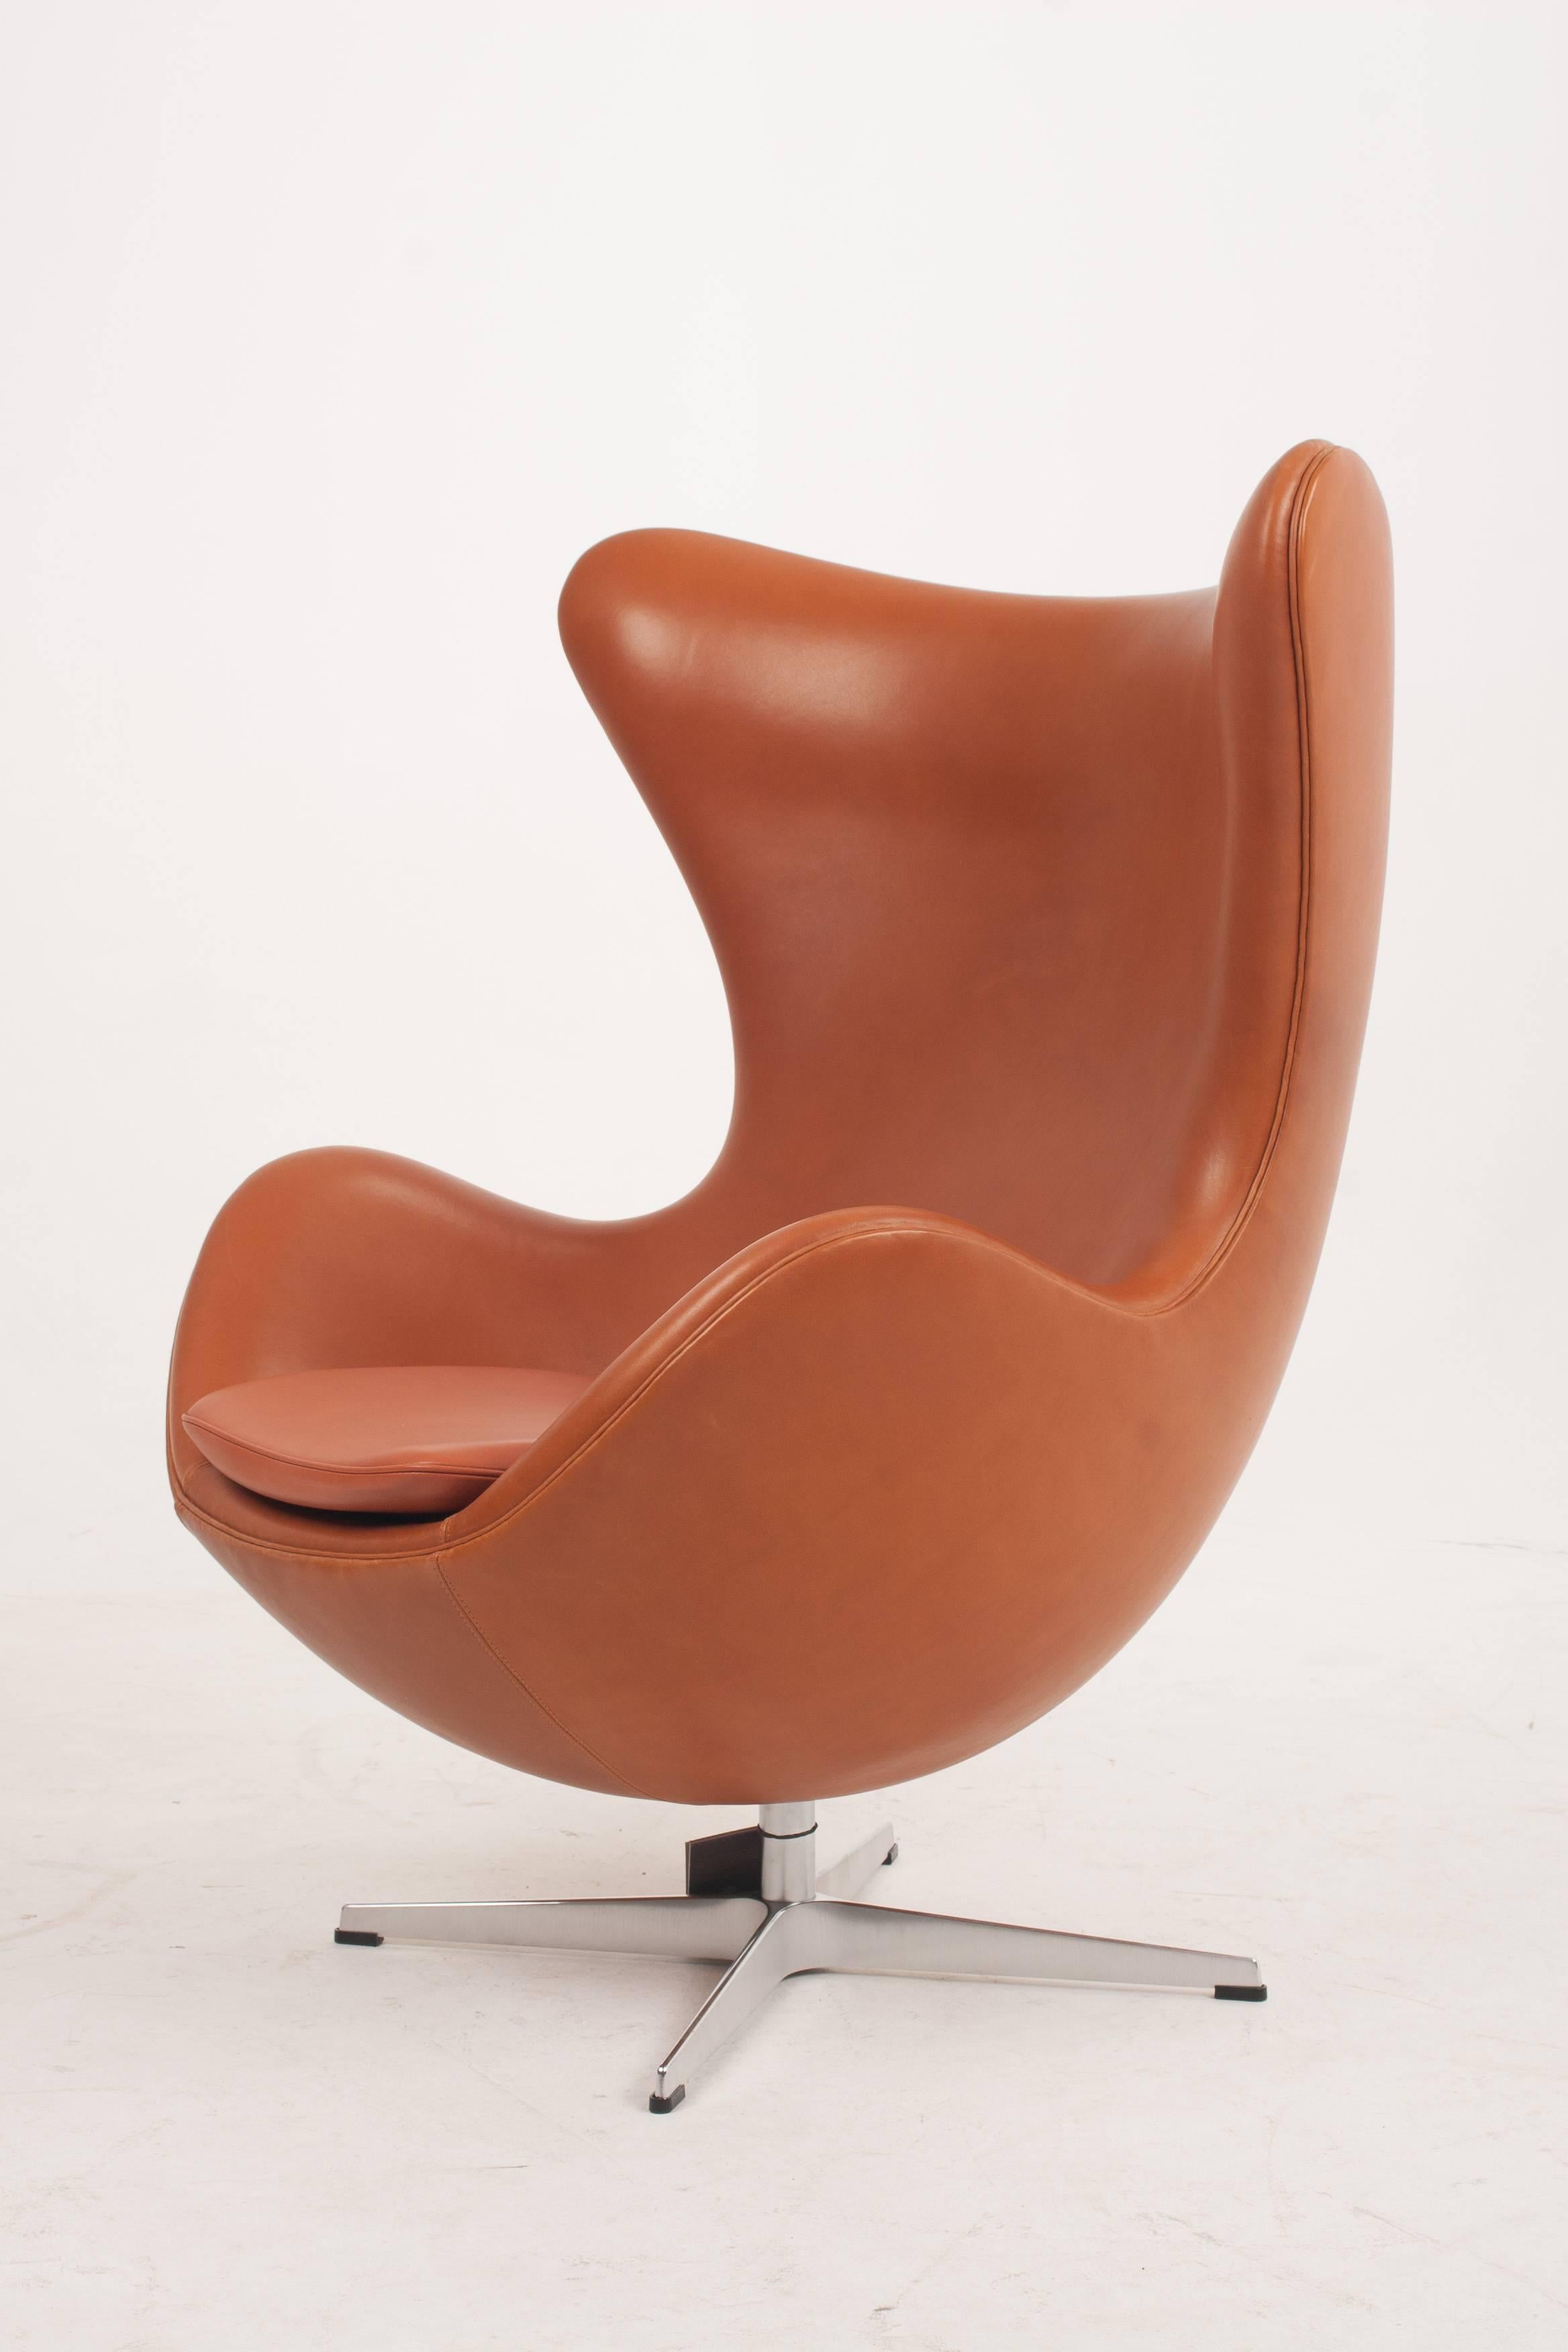 With Tilt and Swivel Function, when you leave the chair, it will move back into original position!

Excellent Condition - Brand new Chair - Super soft leather- with 20 years warranty certificate. 

Comes with Paperwork.(warranty card, valid for